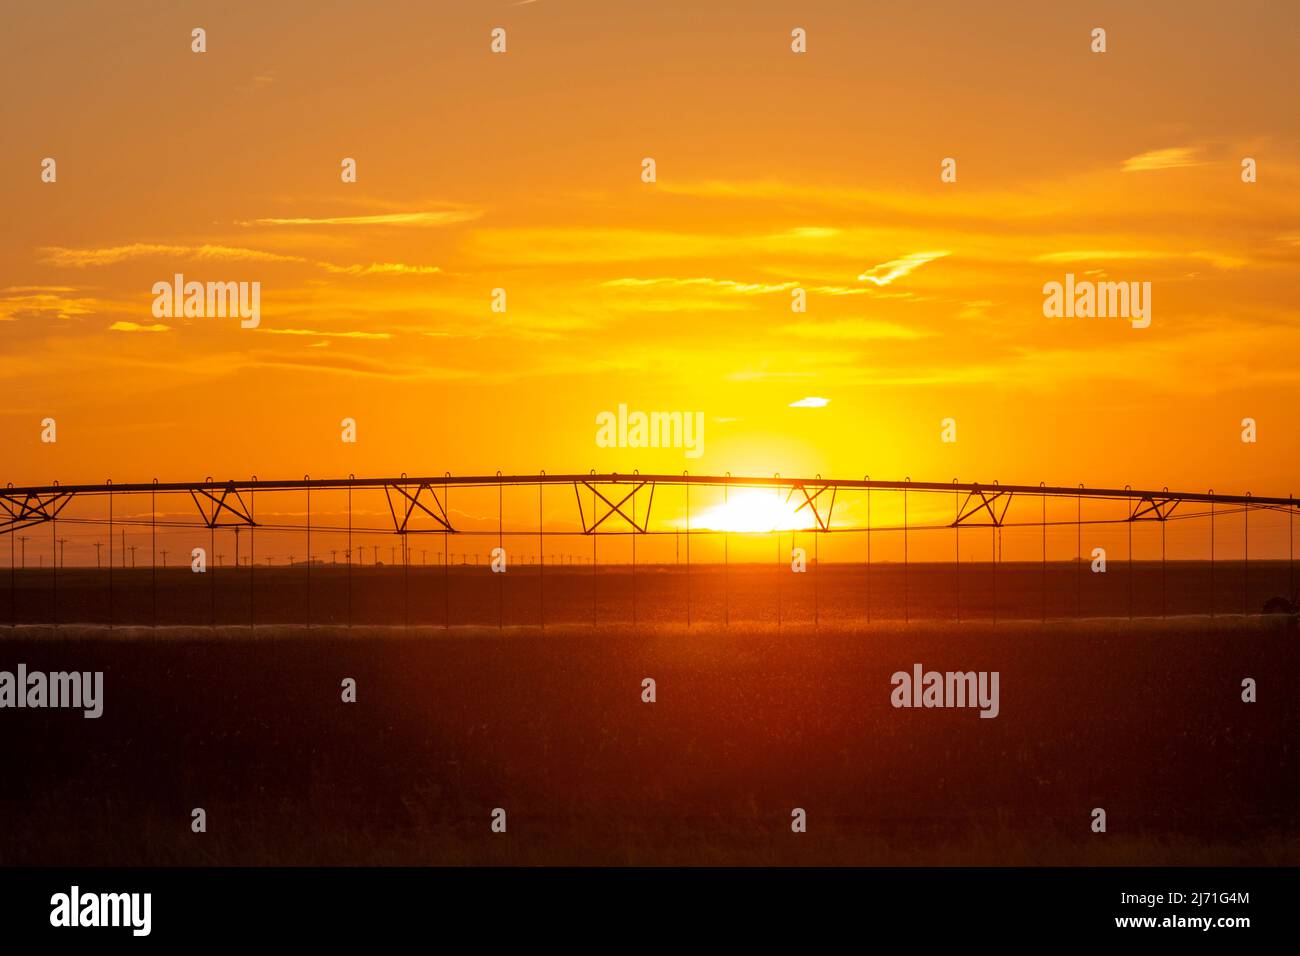 Turpin, Oklahoma - Center pivot irrigation equipment at sunset on a farm in the Oklahoma panhandle. Stock Photo